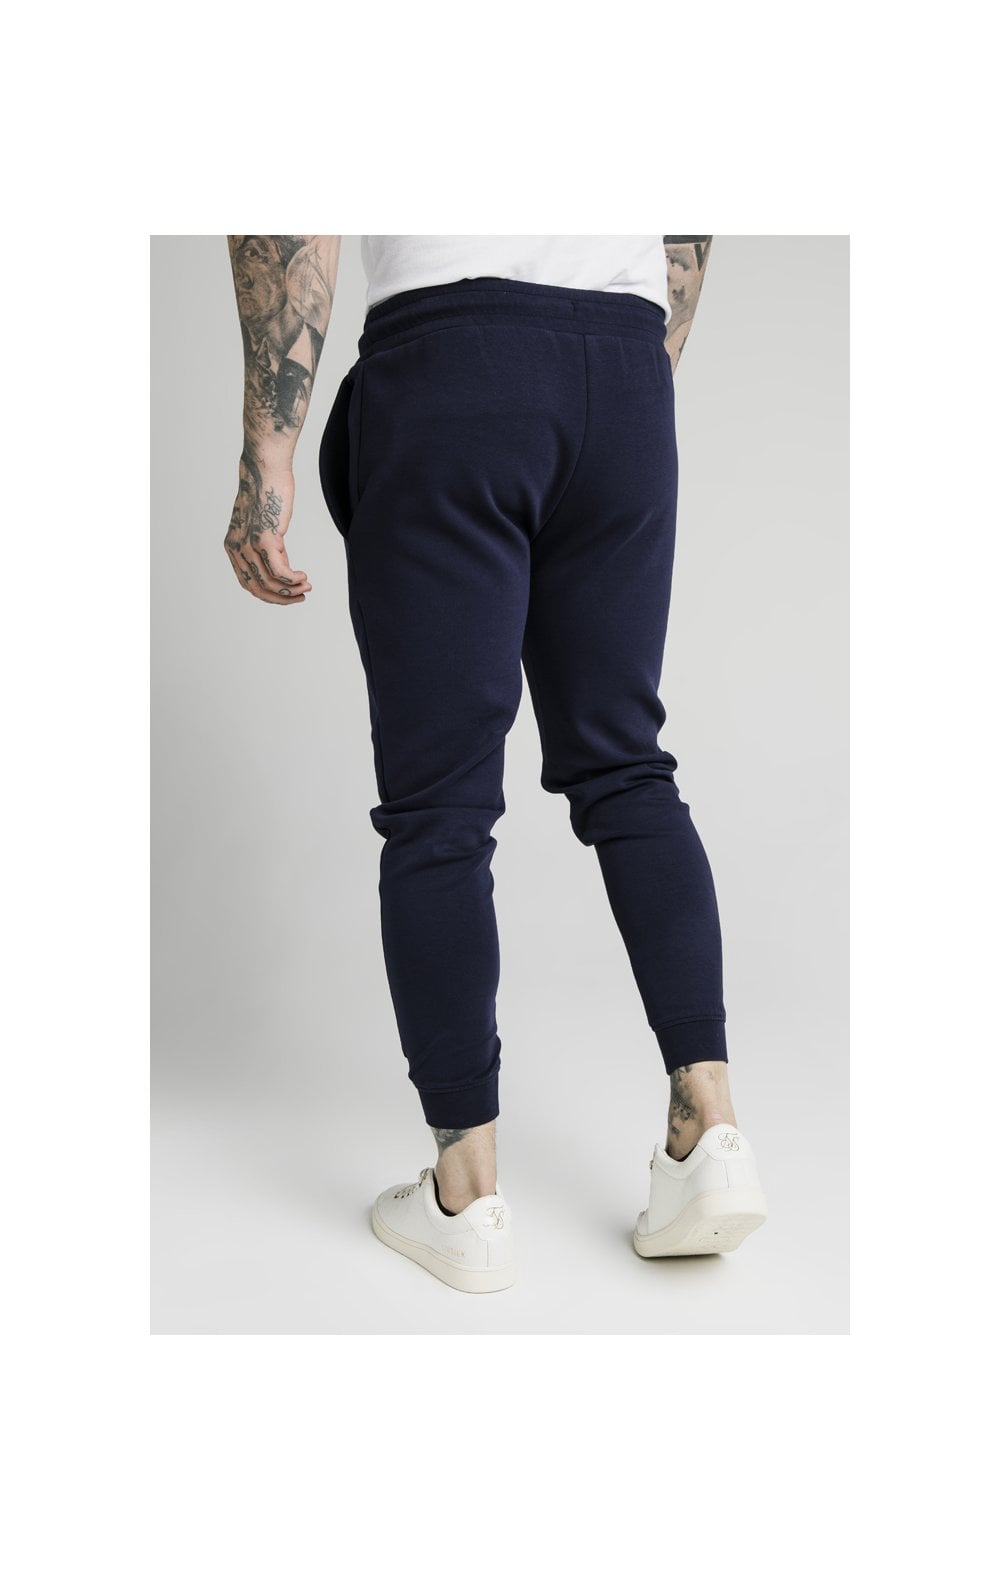 SikSilk Muscle Fit Jogger – Navy (4)